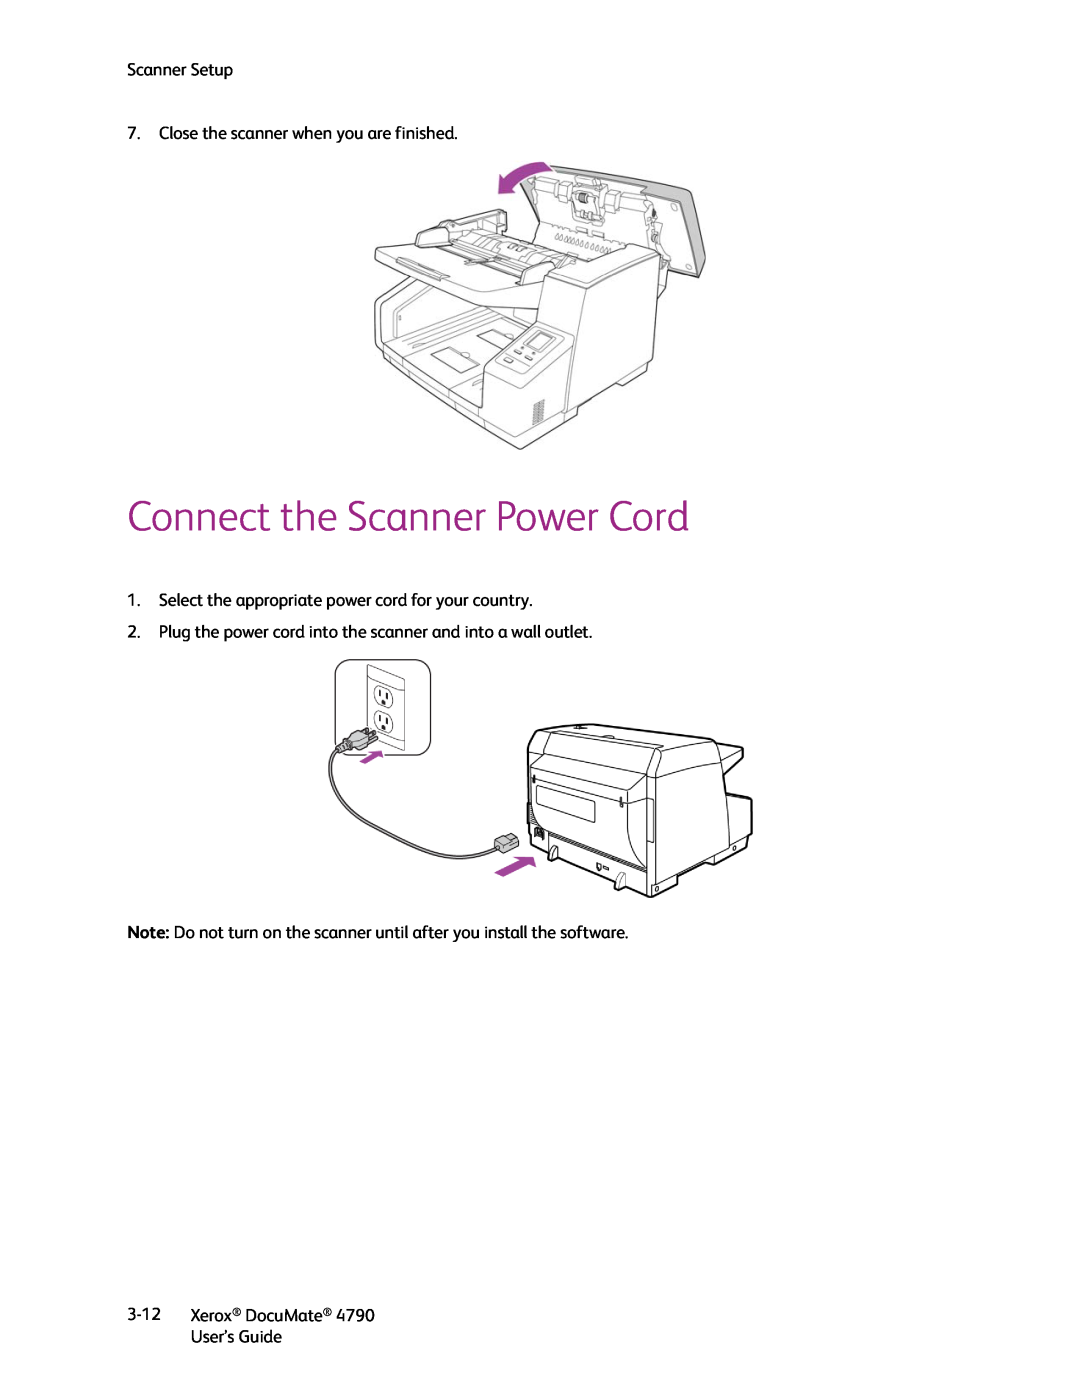 Xerox xerox documate manual Connect the Scanner Power Cord, Scanner Setup 7. Close the scanner when you are finished, 3-12 